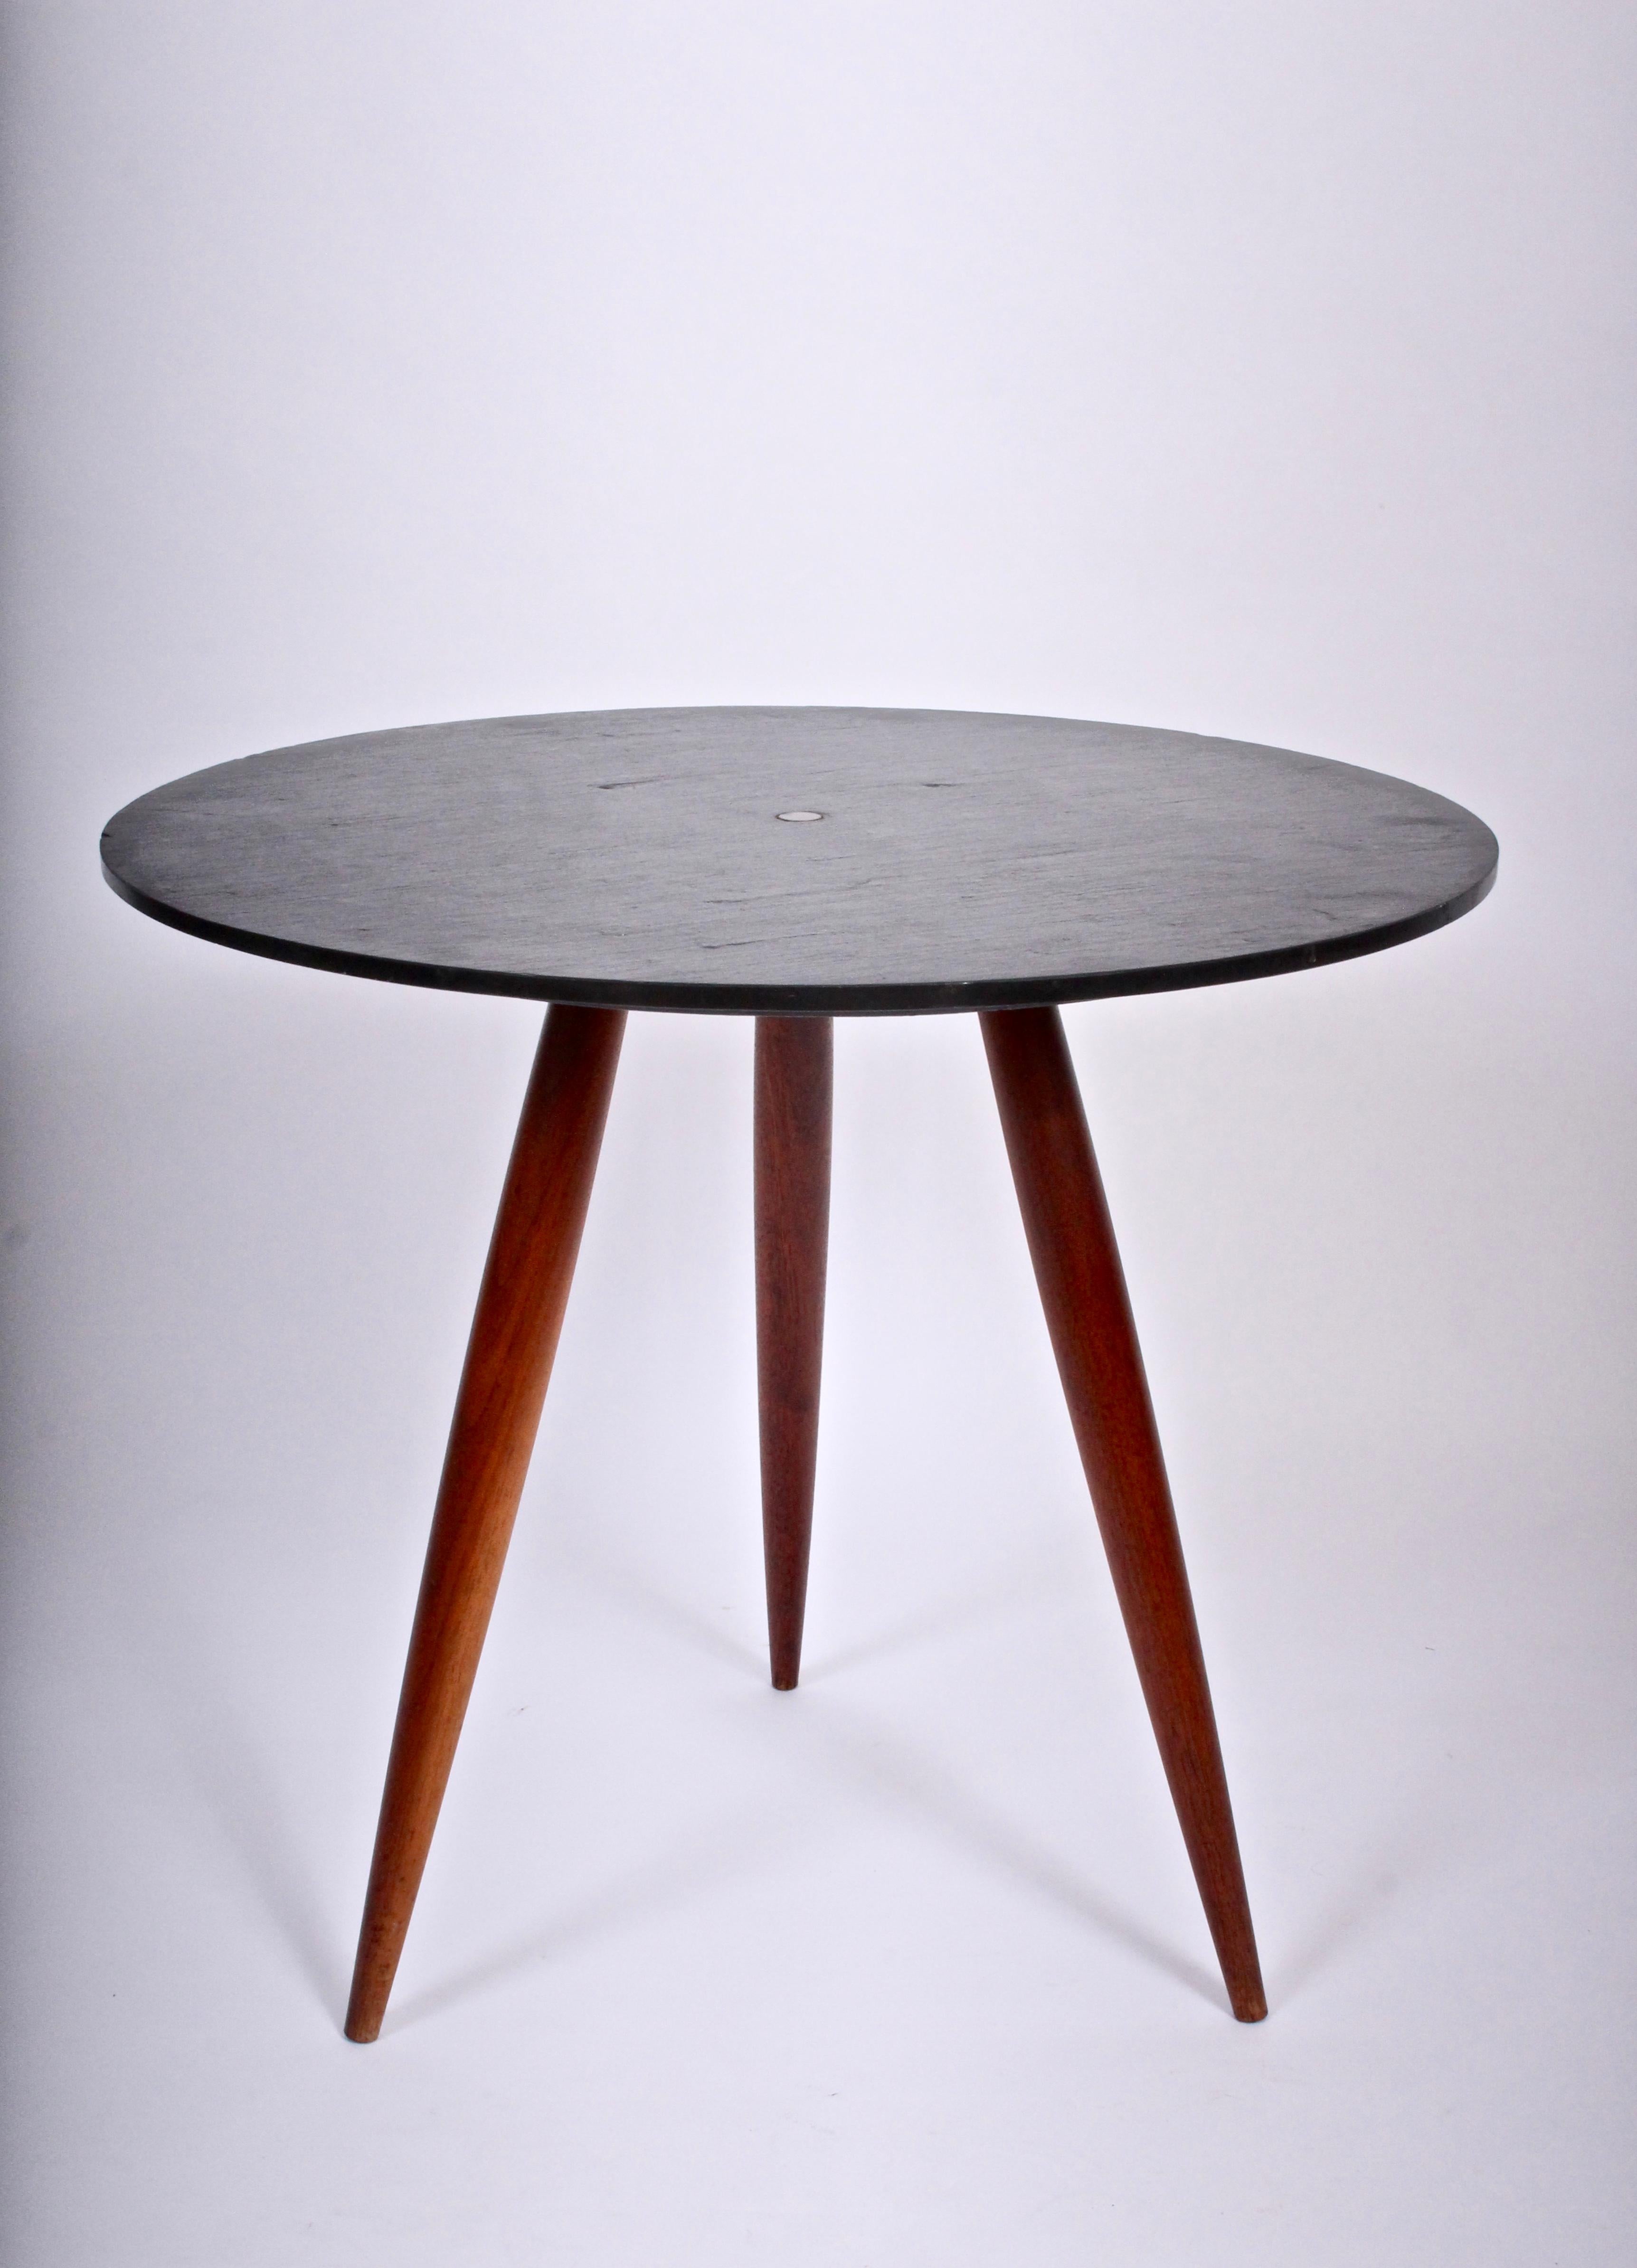 Phillip Lloyd Powell tri leg walnut table with natural slate surface, circa 1960. Featuring turned walnut legs, round charcoal gray slate top, classic round flat center brass pin. Early. Modernist. Rarity.  Additional photographs available upon